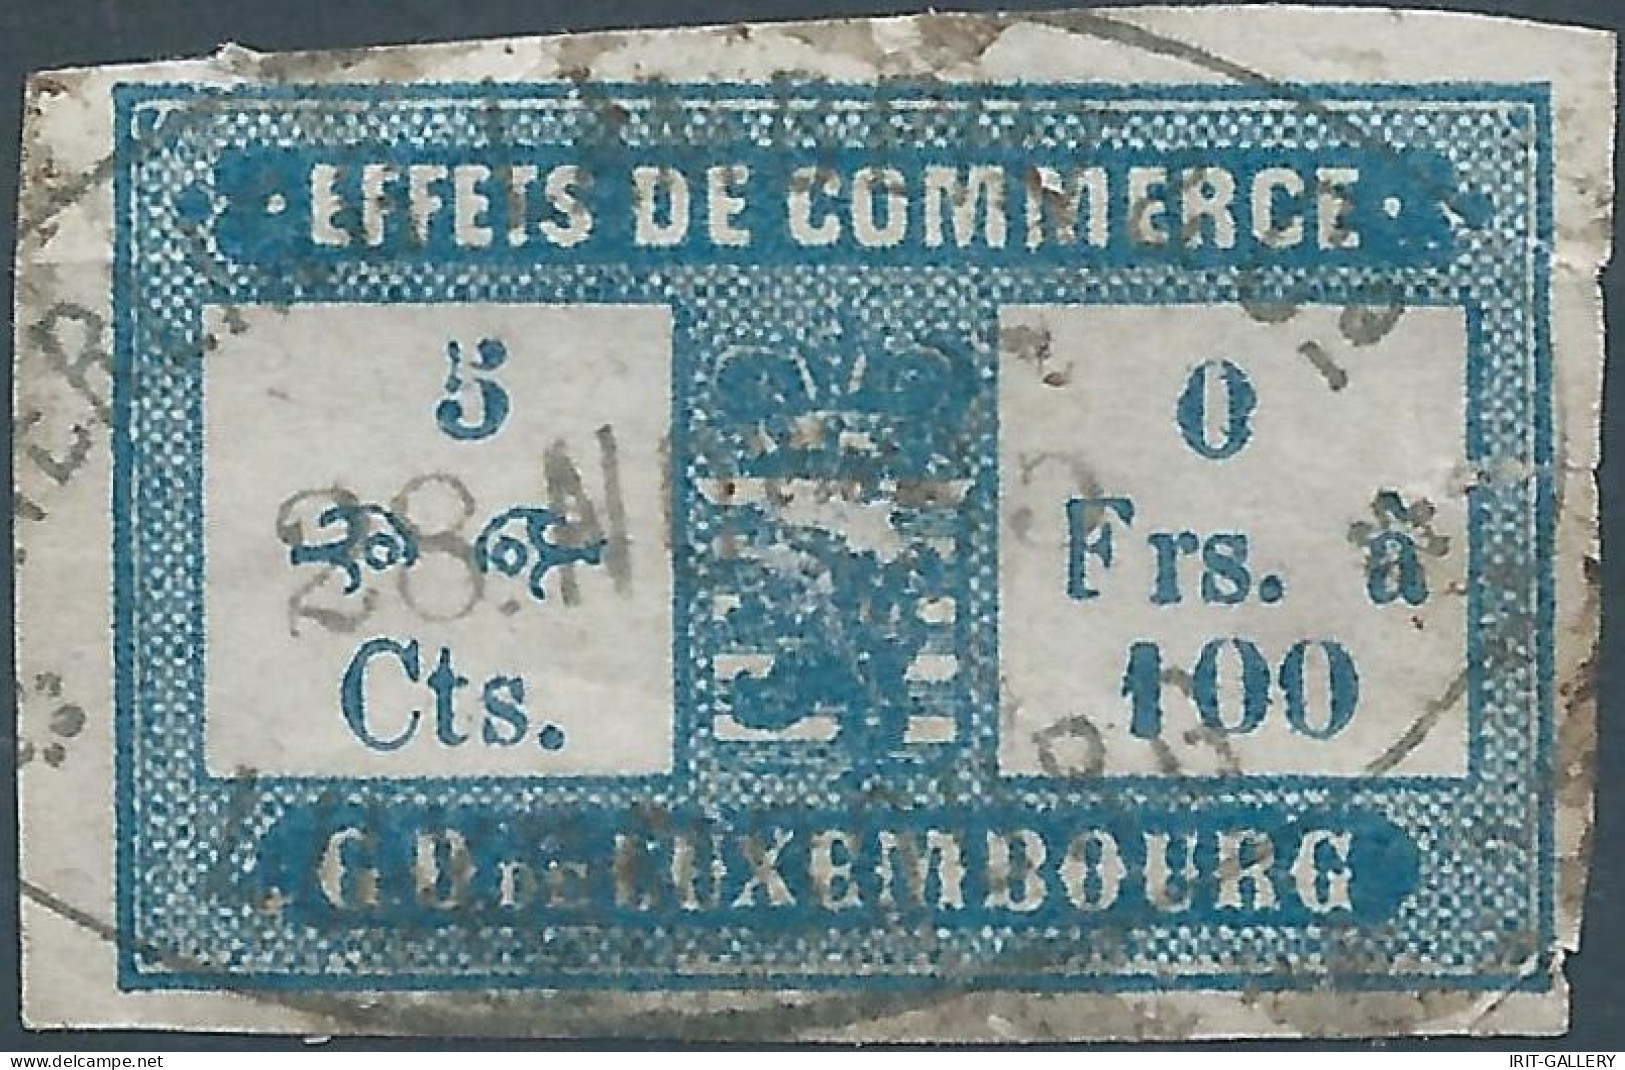 Lussemburgo - G.D De LUXEMBOURG,1885 Revenue Stamp Tax Fiscal , EFFETS DE COMMERCE-TRADING EFFECTS , Very Old - Revenue Stamps